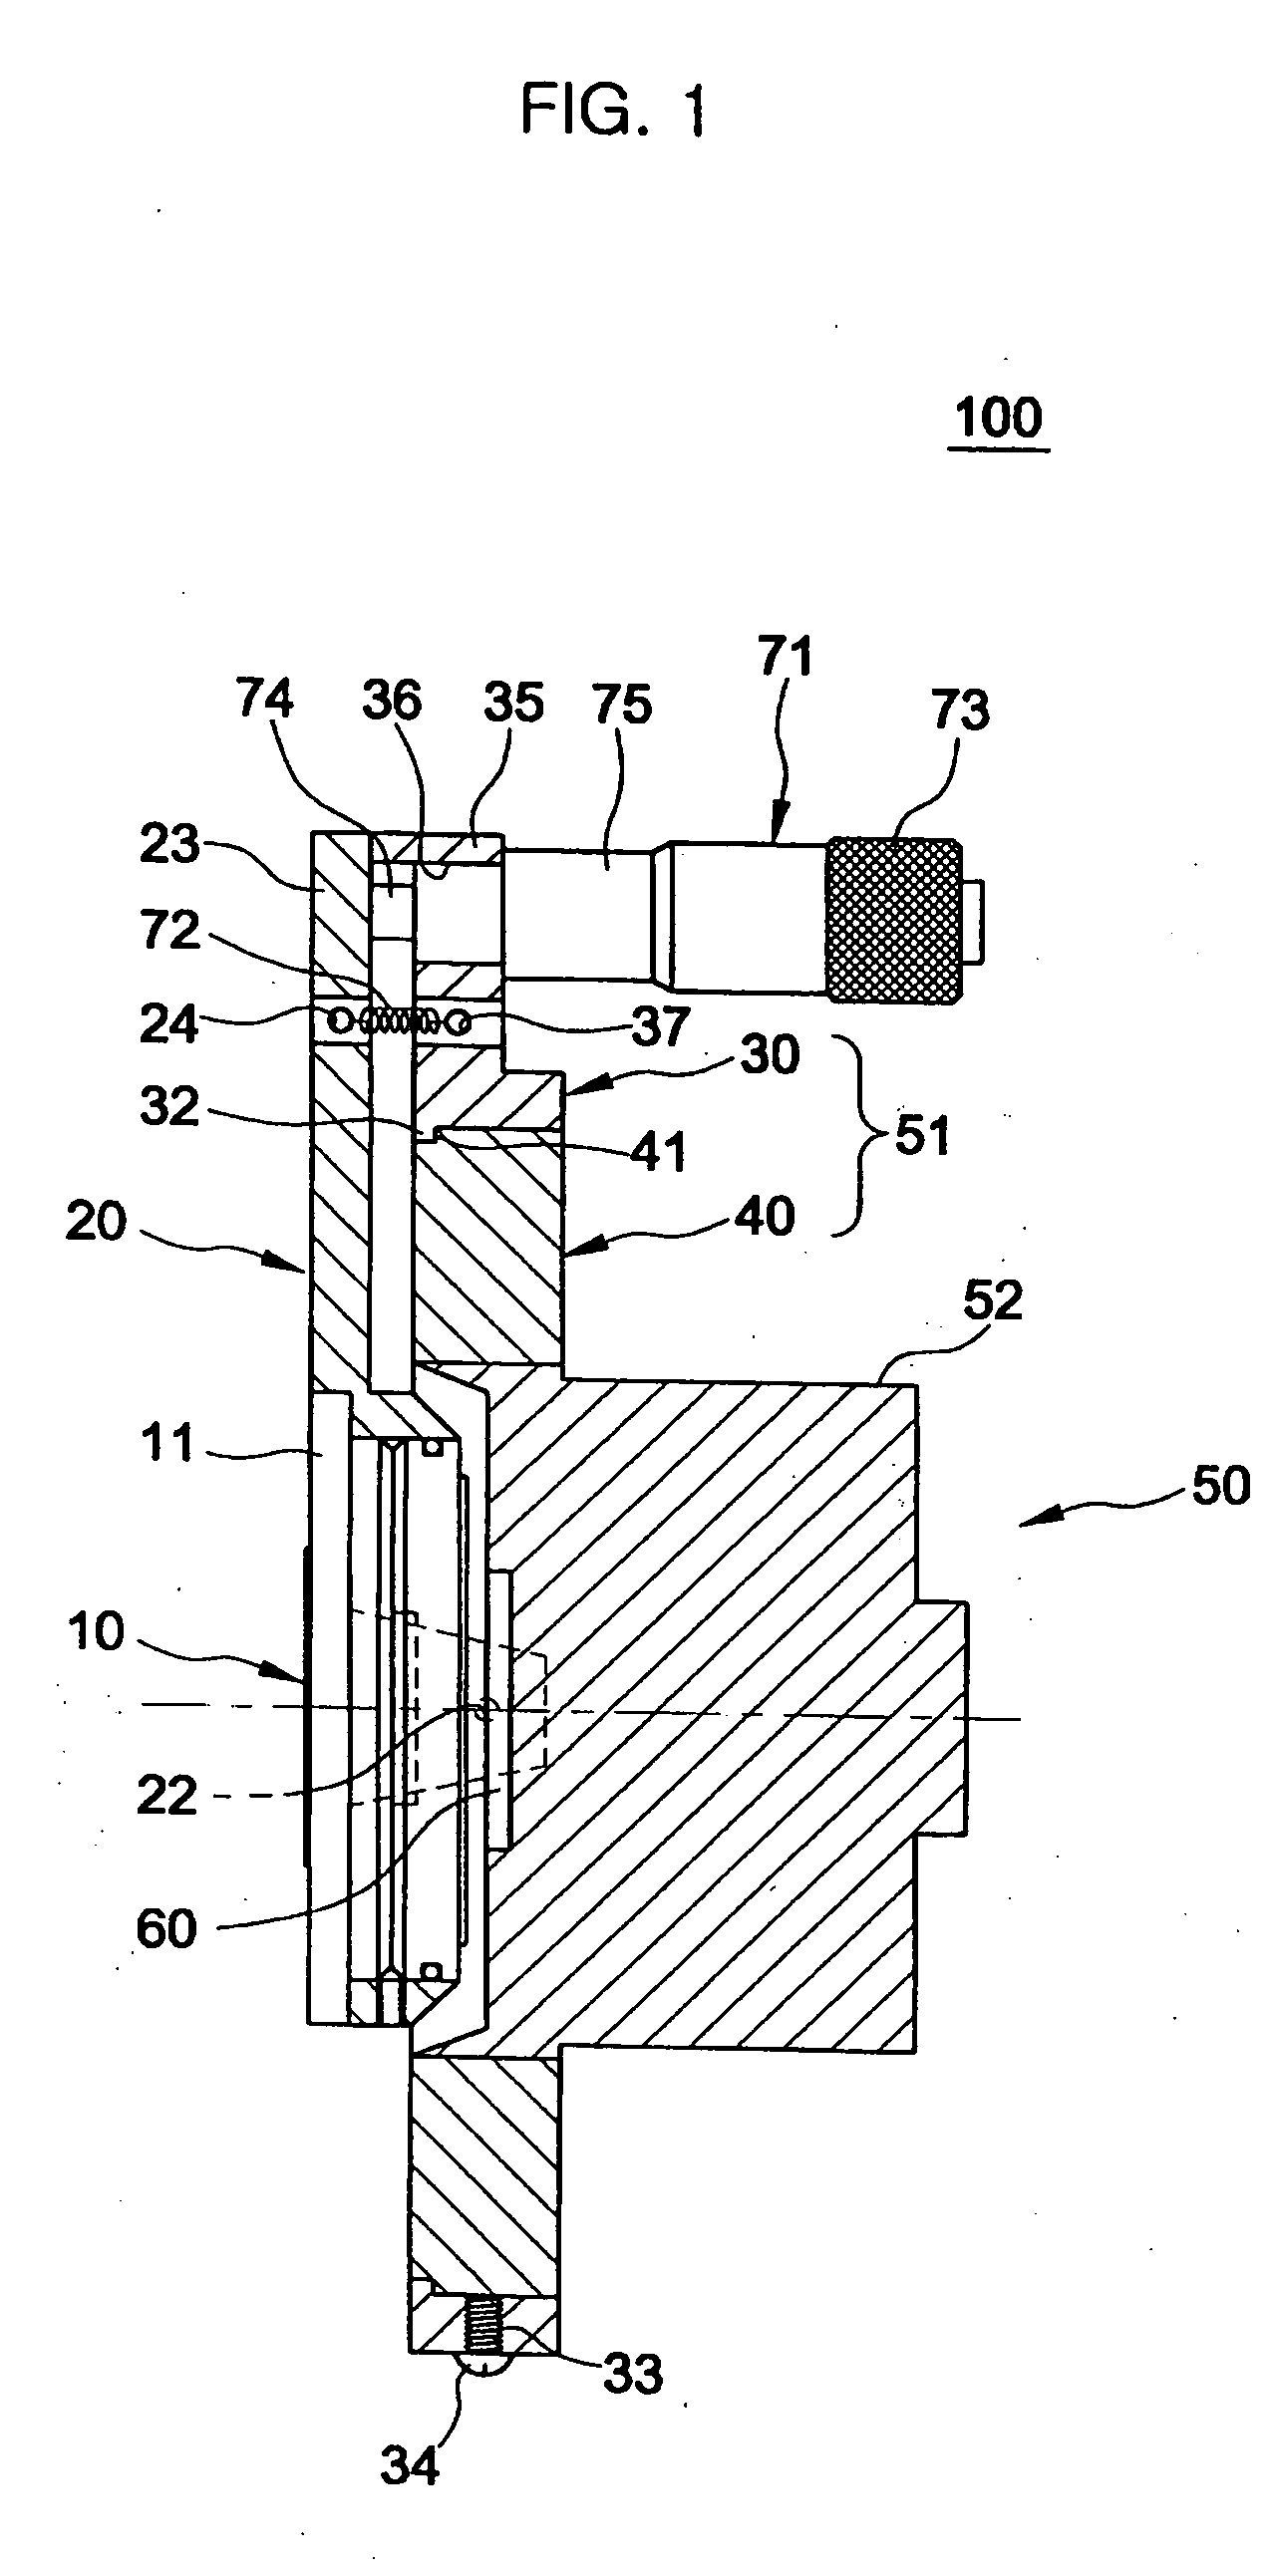 Optical system with image producing surface control unit